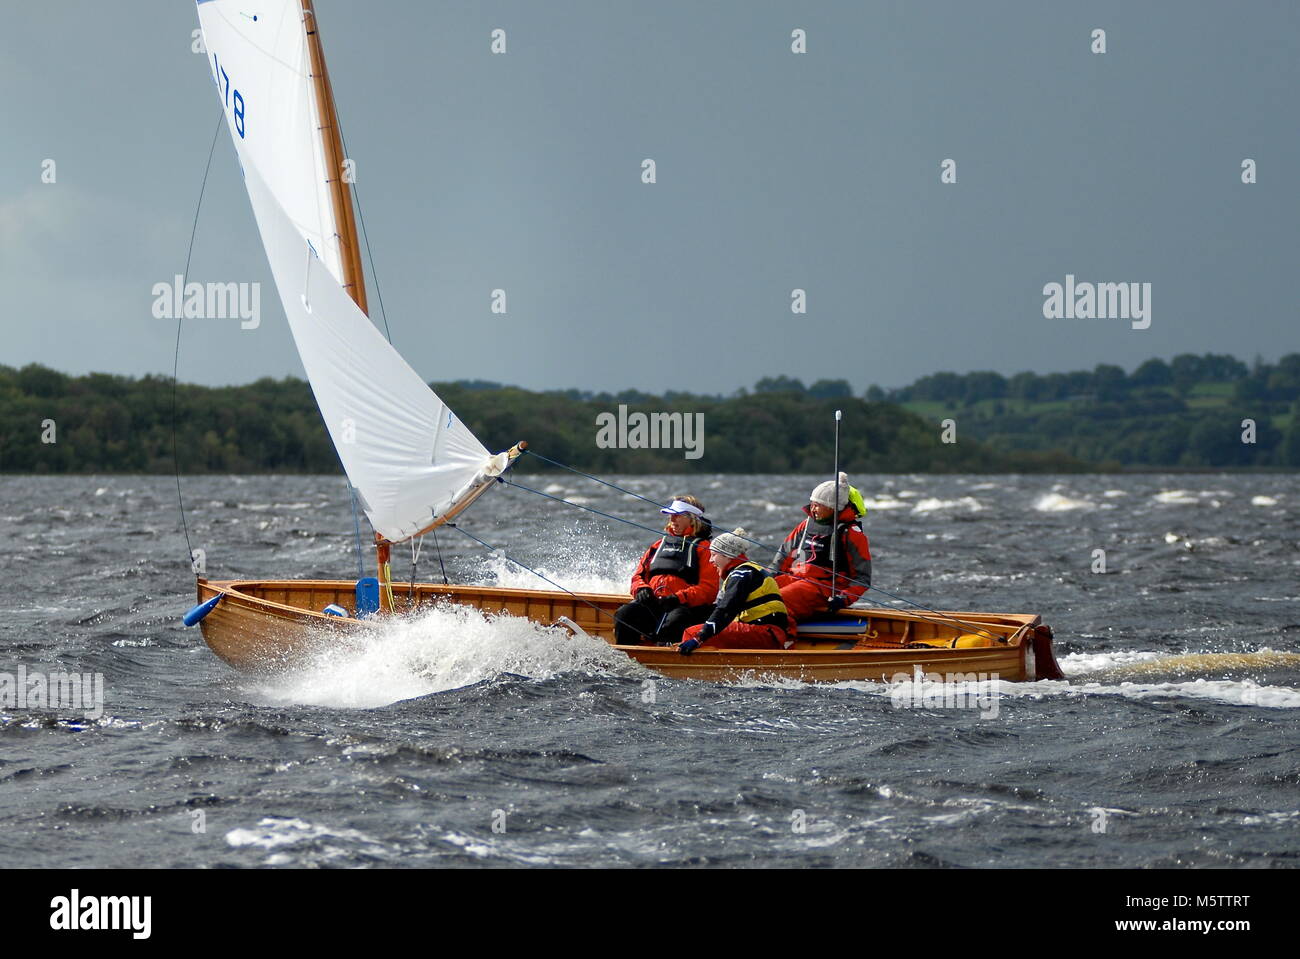 Olympic sailor Cathy MacAleavey (left) races her Shannon One Design down Lough Ree in 25 knots of wind during the Irish raid on the River Shannon. Stock Photo